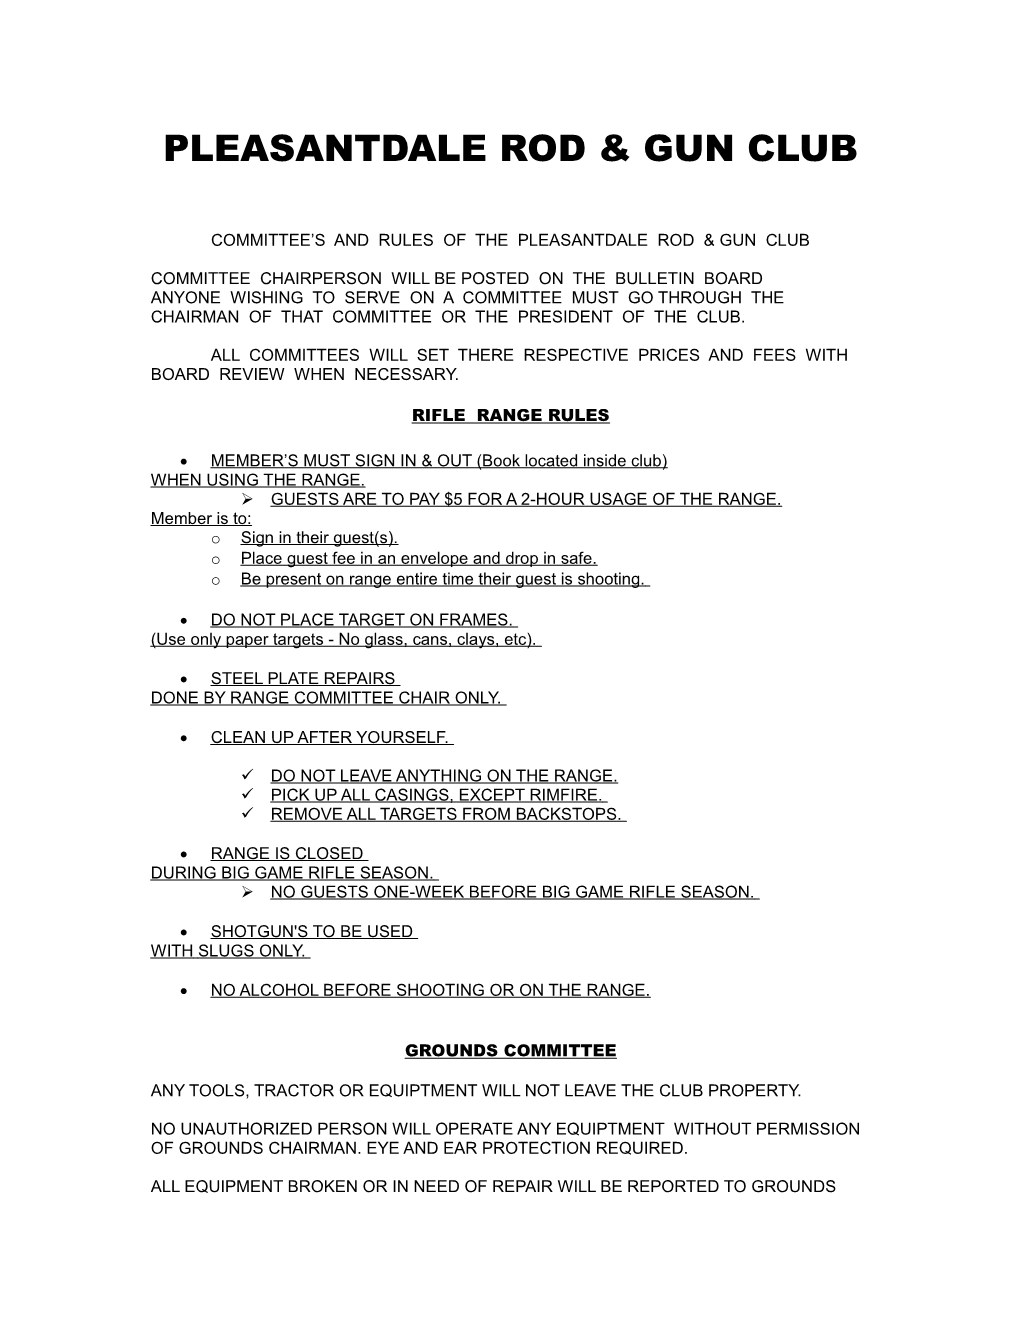 Committee S and Rules of the Pleasantdale Rod & Gun Club